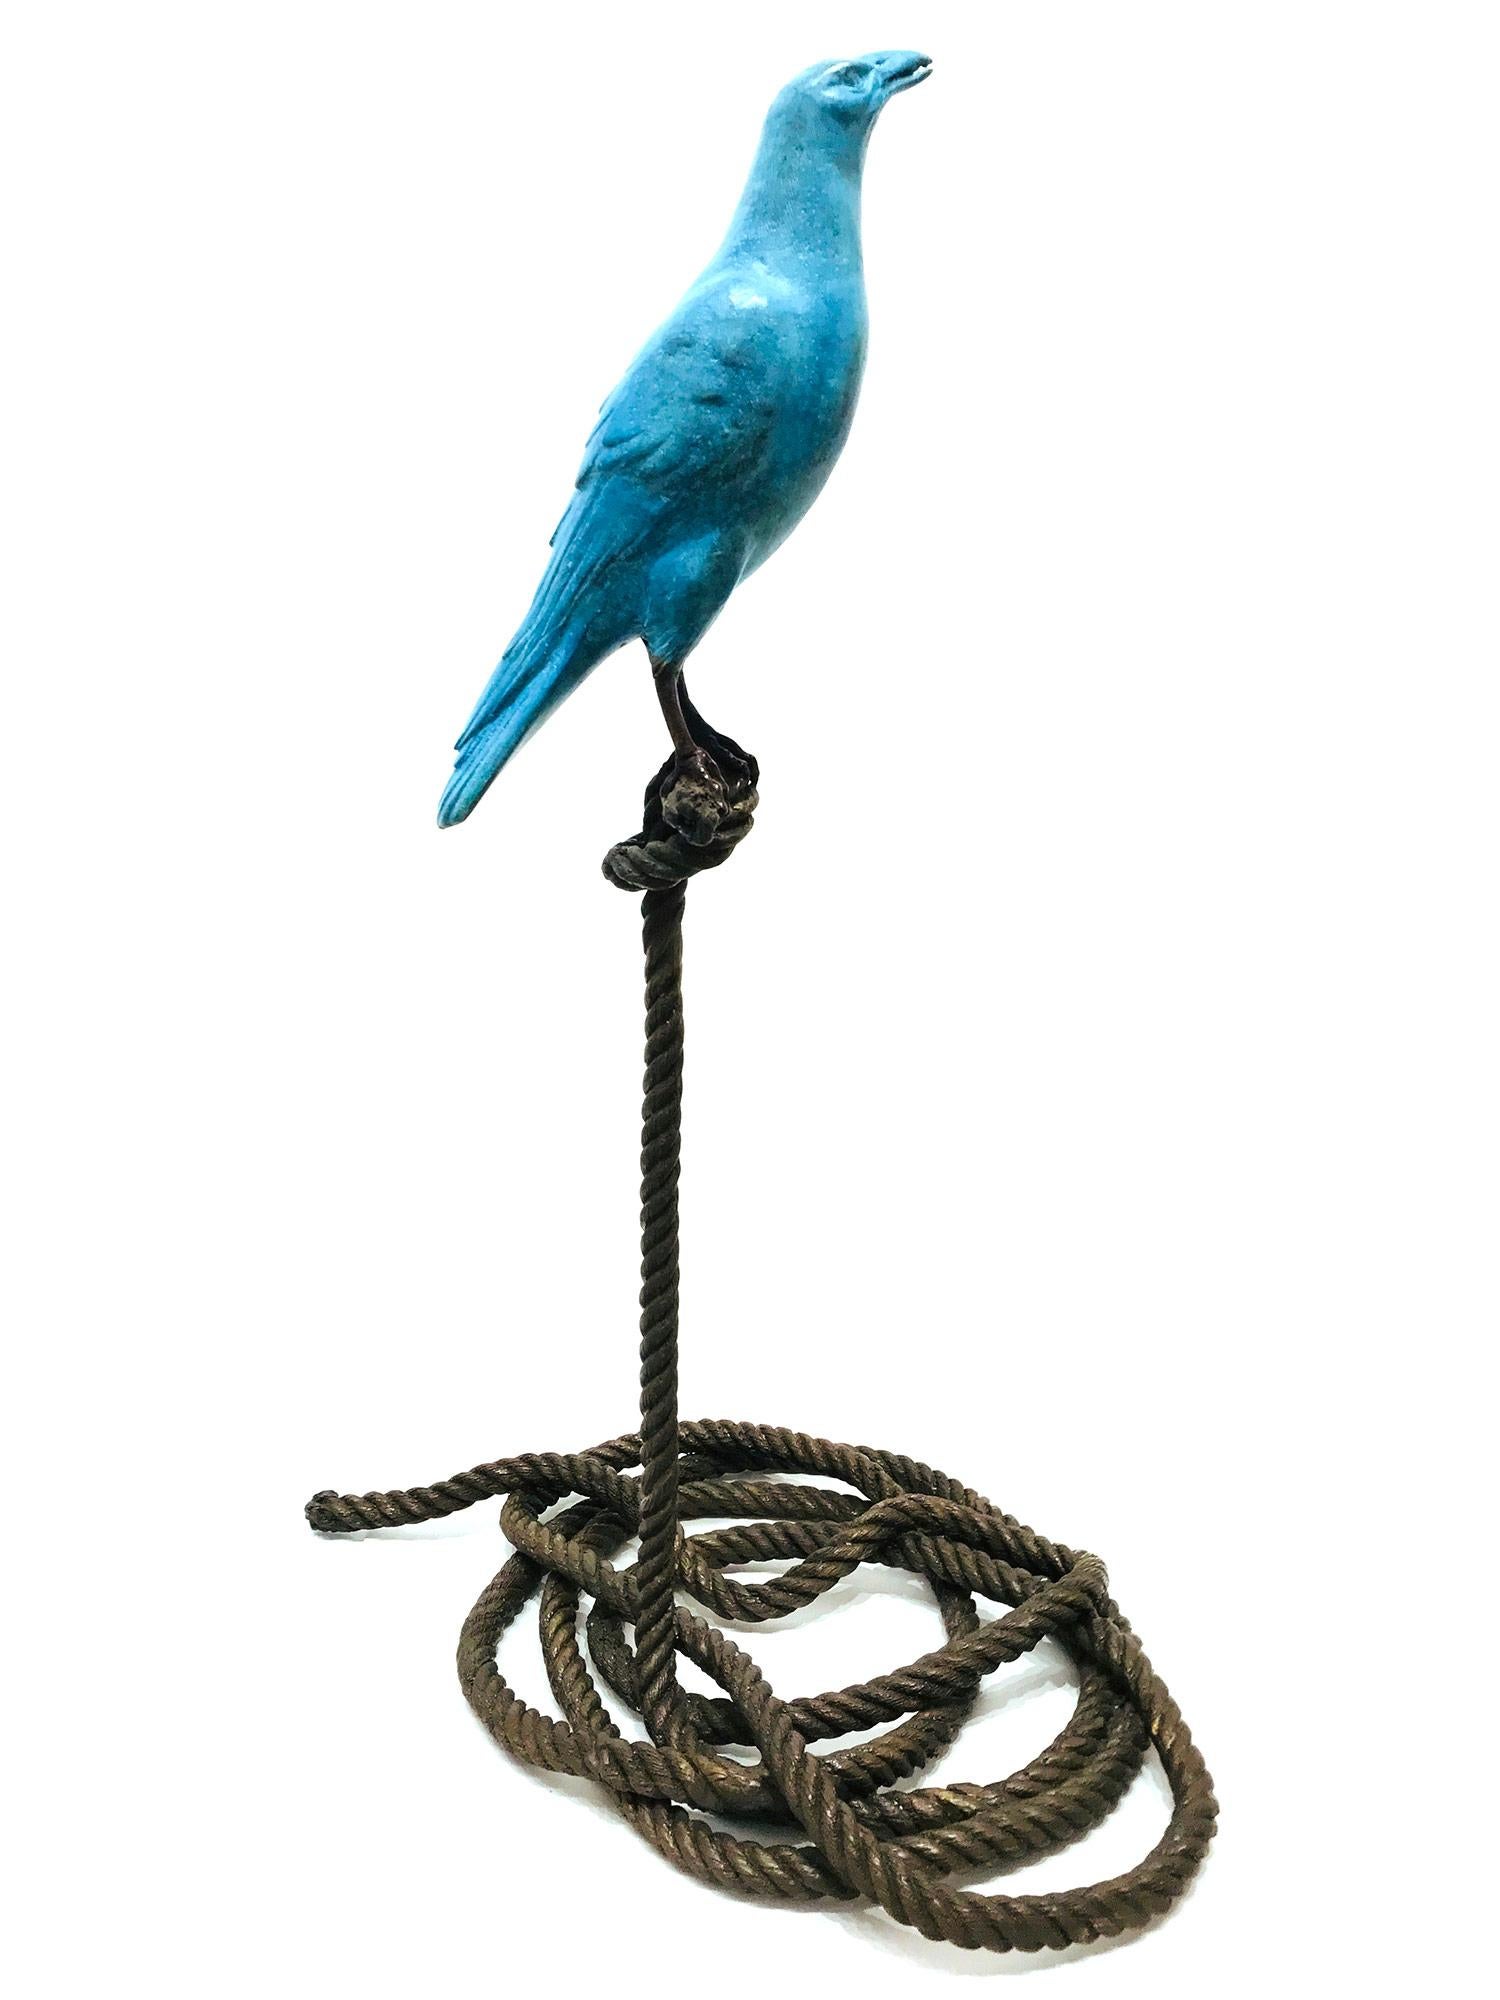 Gillie and Marc Schattner Abstract Sculpture - Roger, The Magpie on Rope